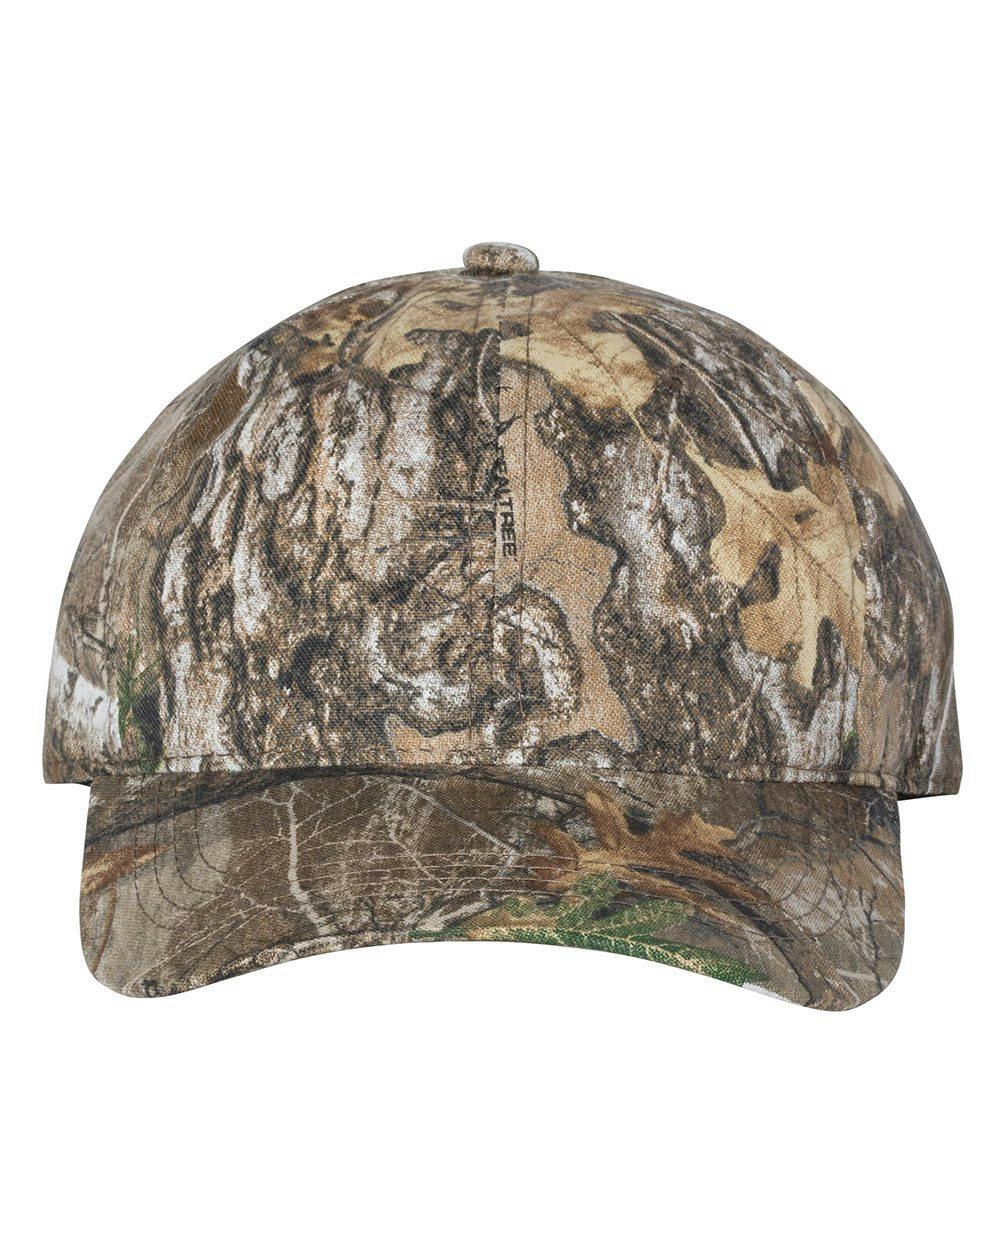 Image for Garment-Washed Camo Cap - CGW115